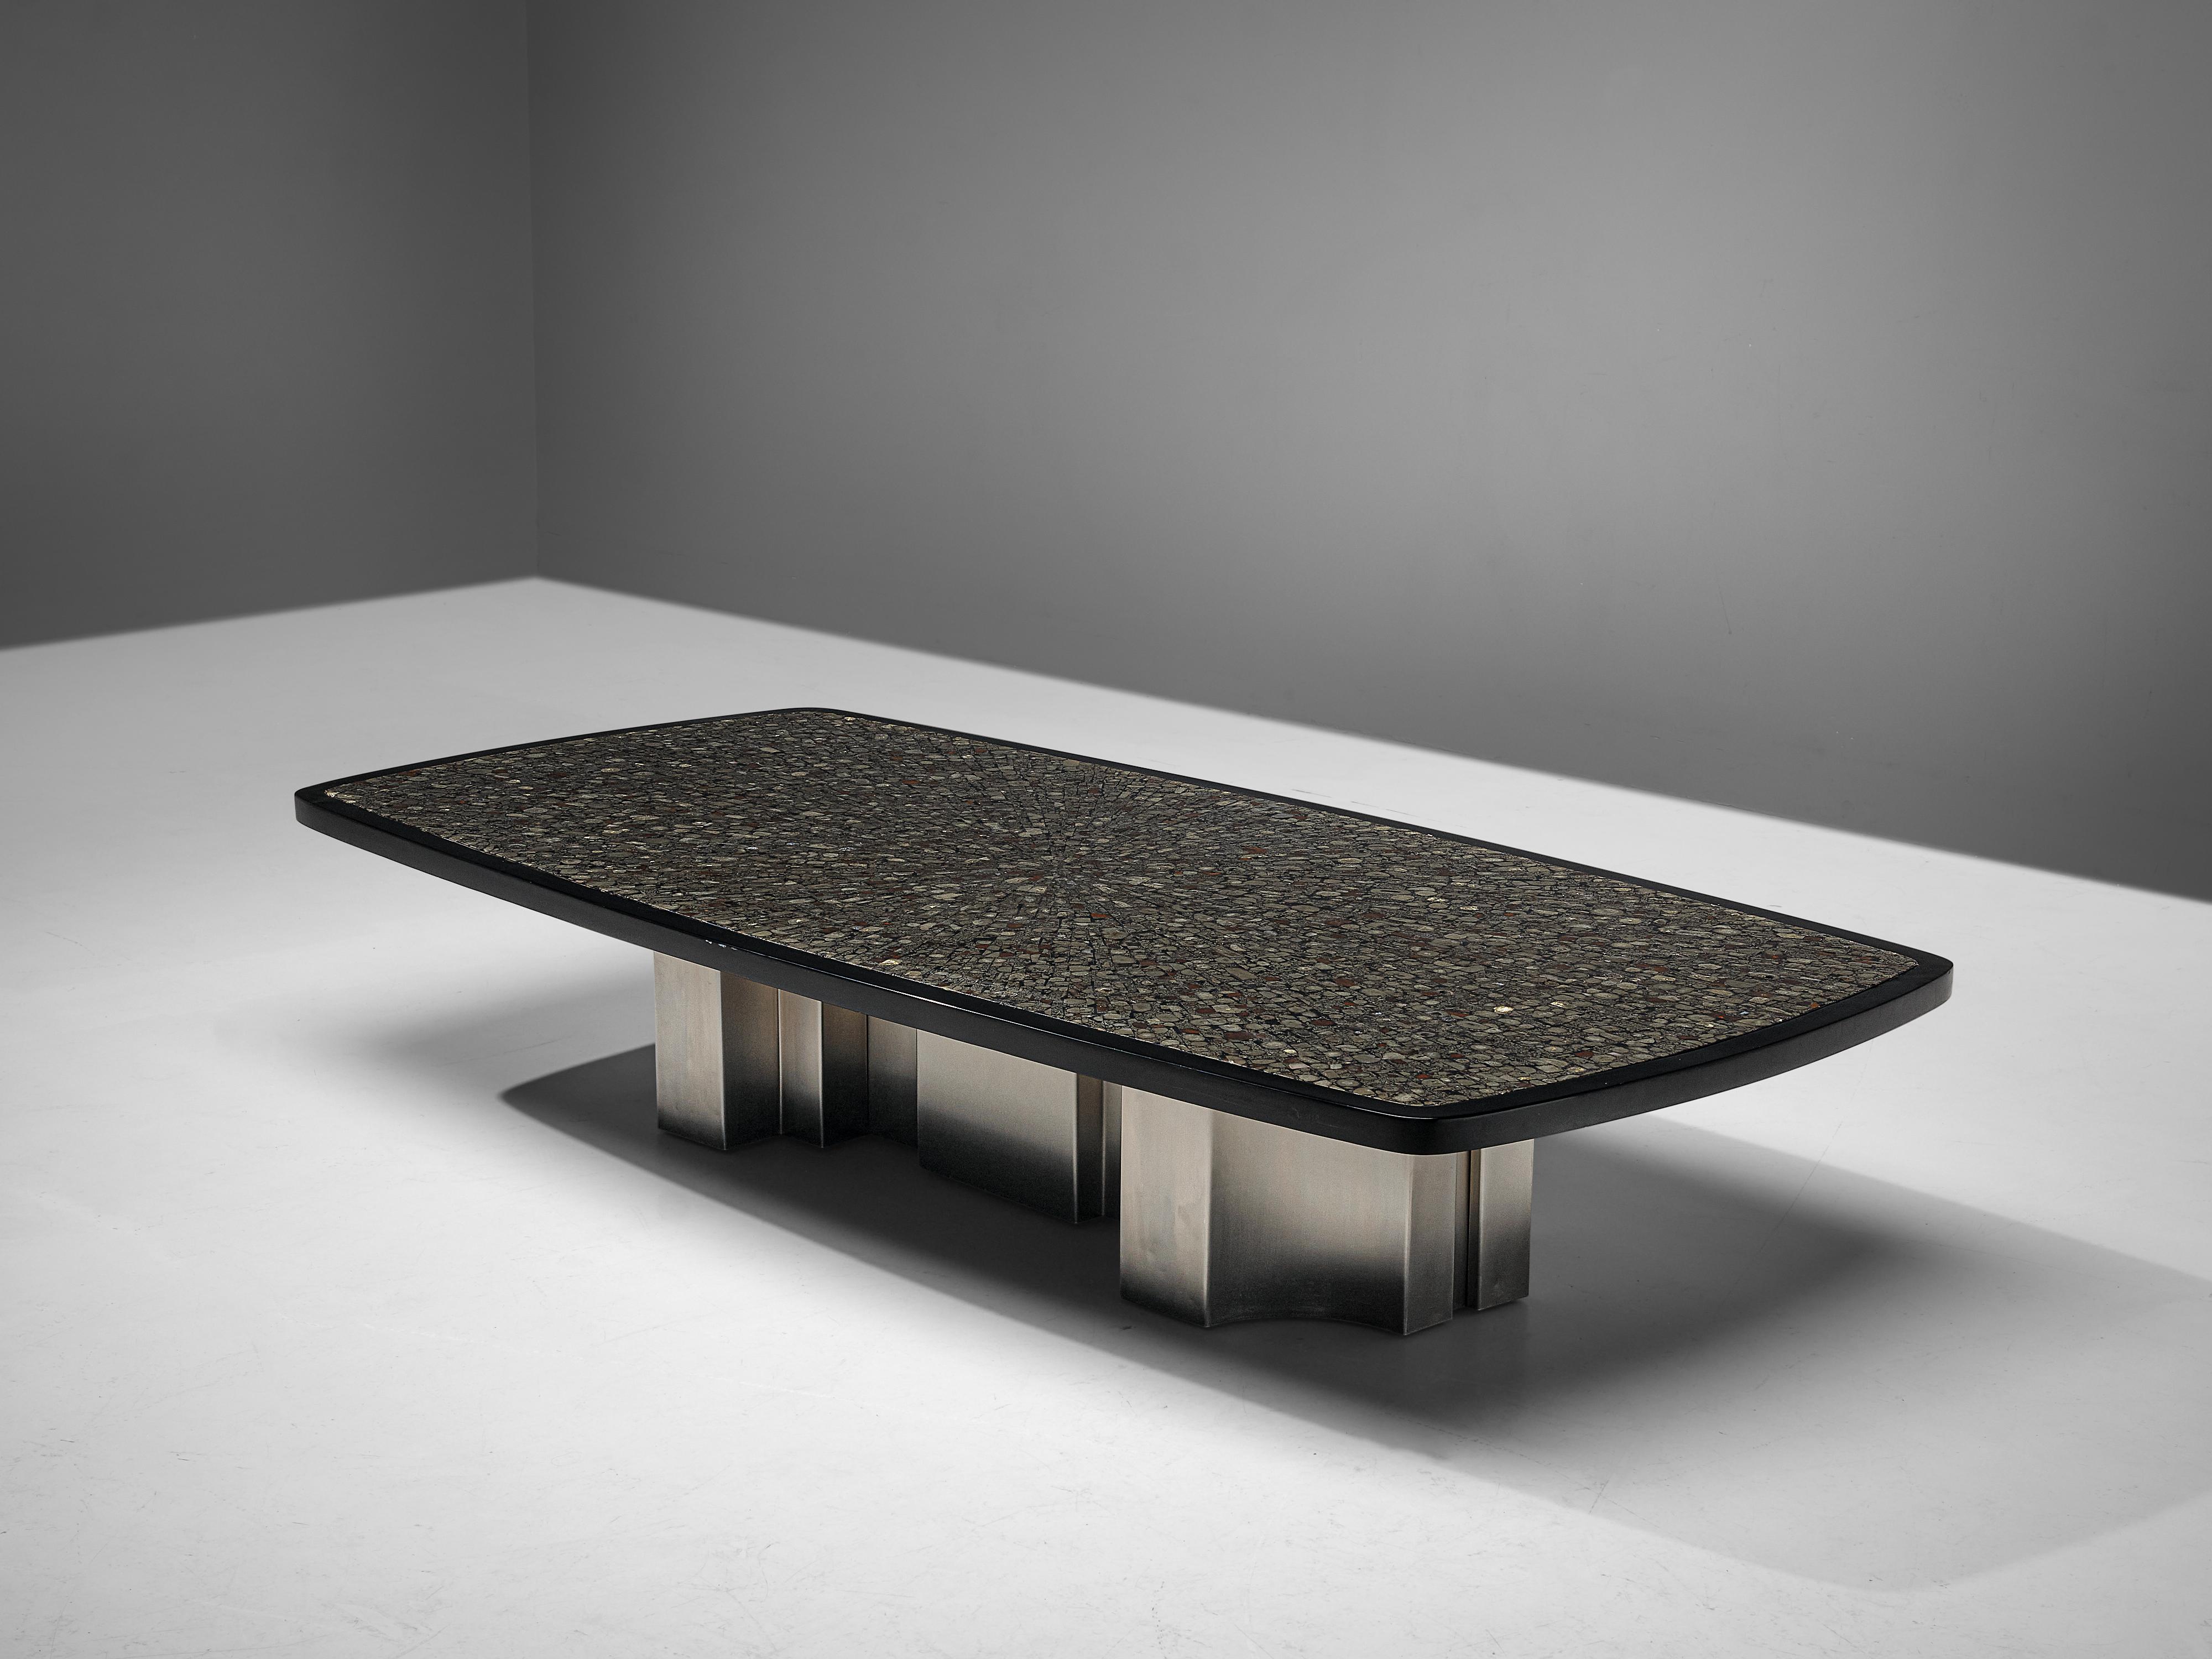 Jean Claude Dresse, large coffee table, marcasite, wood, steel, Belgium, 1970s

This extraordinary piece was crafted with great eye for proportions and detail, typical for the work of Dresse. The luxurious character of the marcasite inlay emphasizes